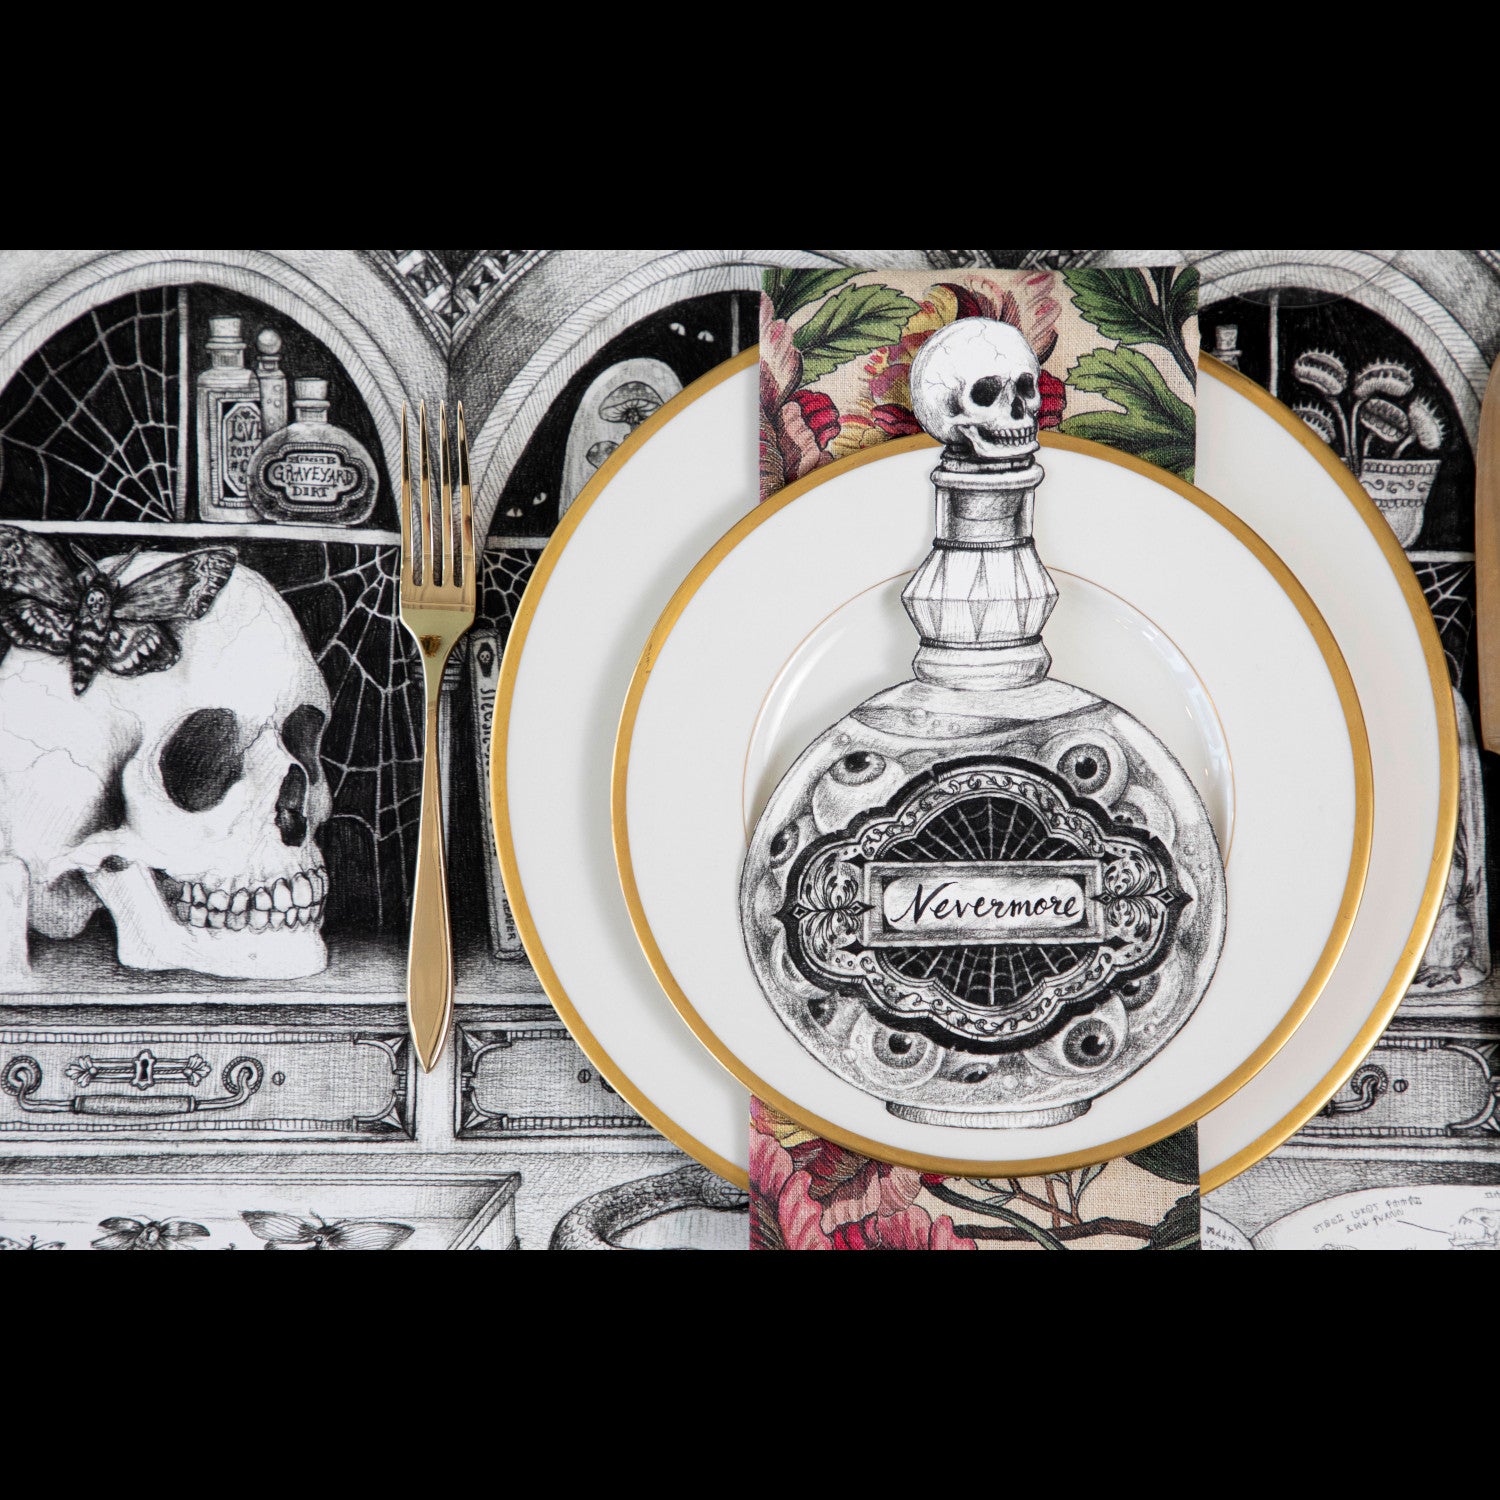 A spooky Halloween-themed place setting featuring a Poison Bottle Table Accent with &quot;Nevermore&quot; written on the label resting on the plate.